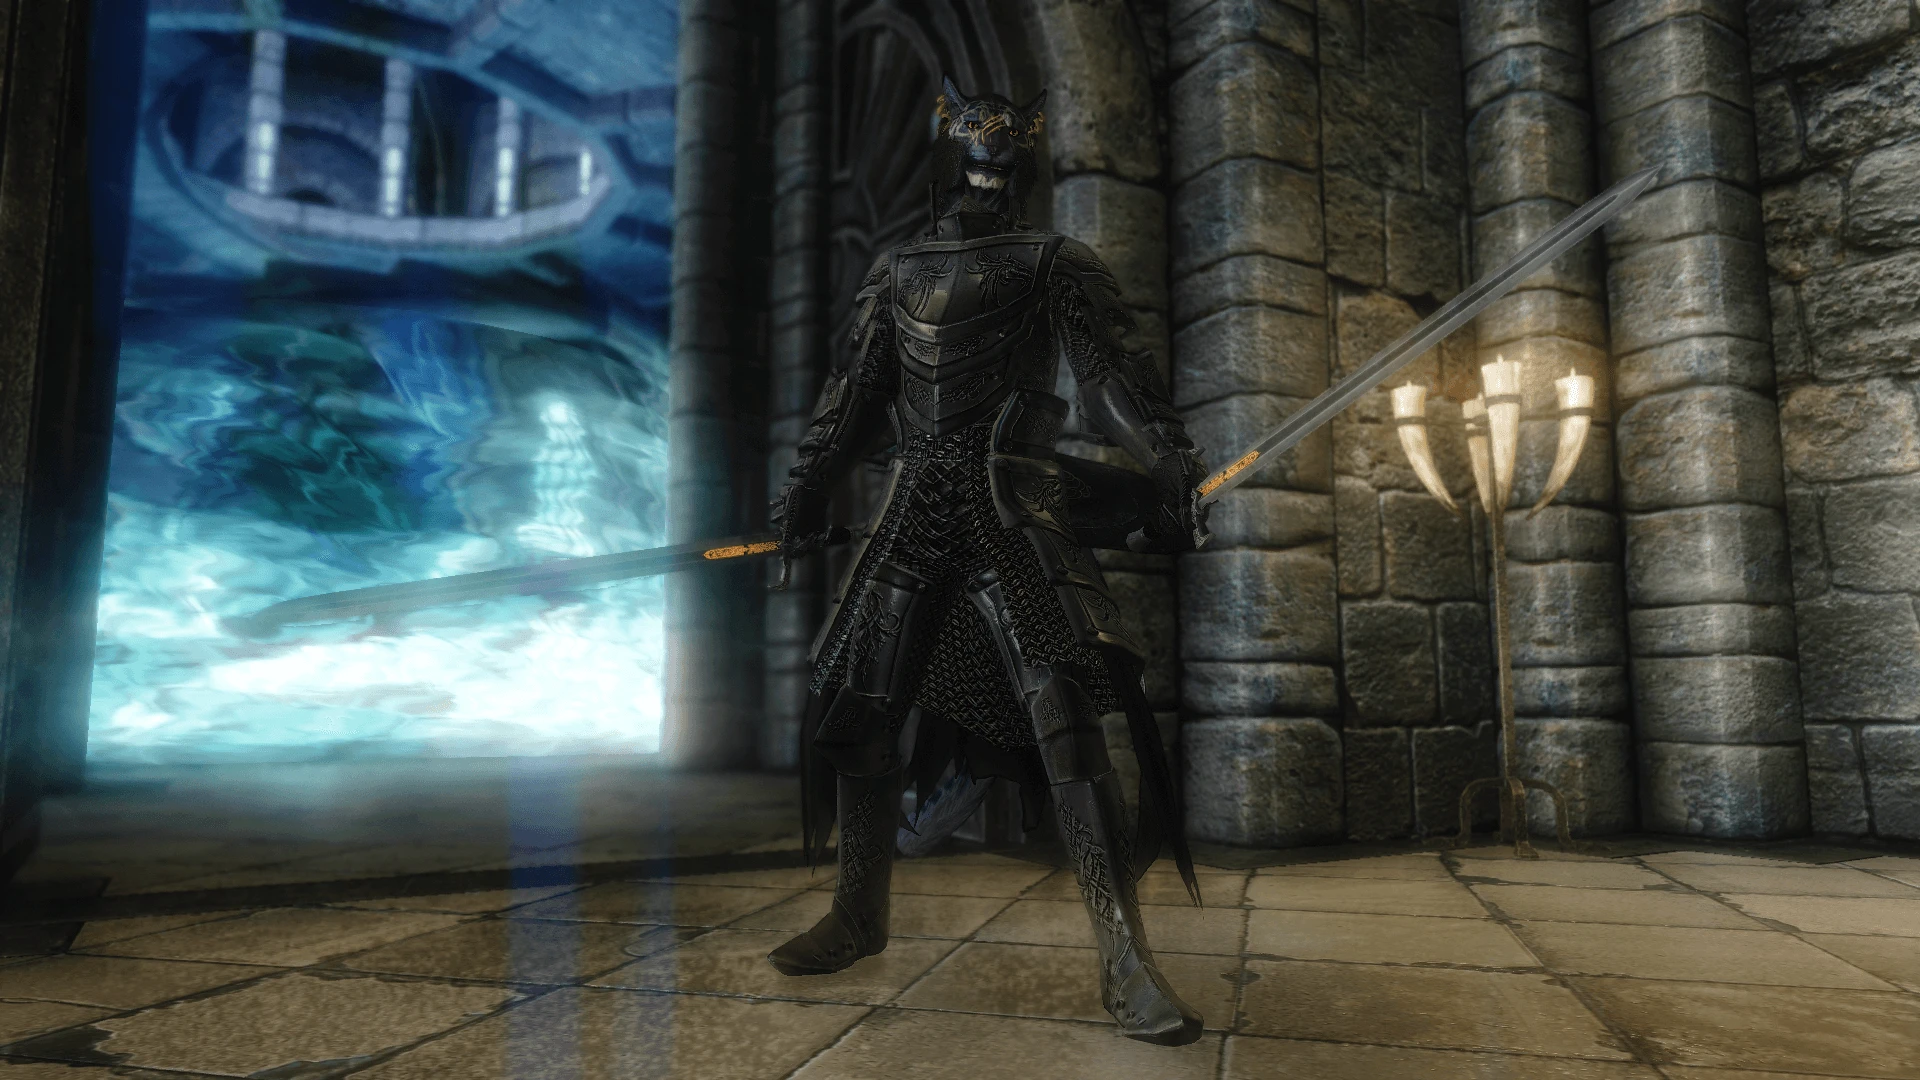 silver dragon armor remastered for sse at skyrim nexus mods and community.